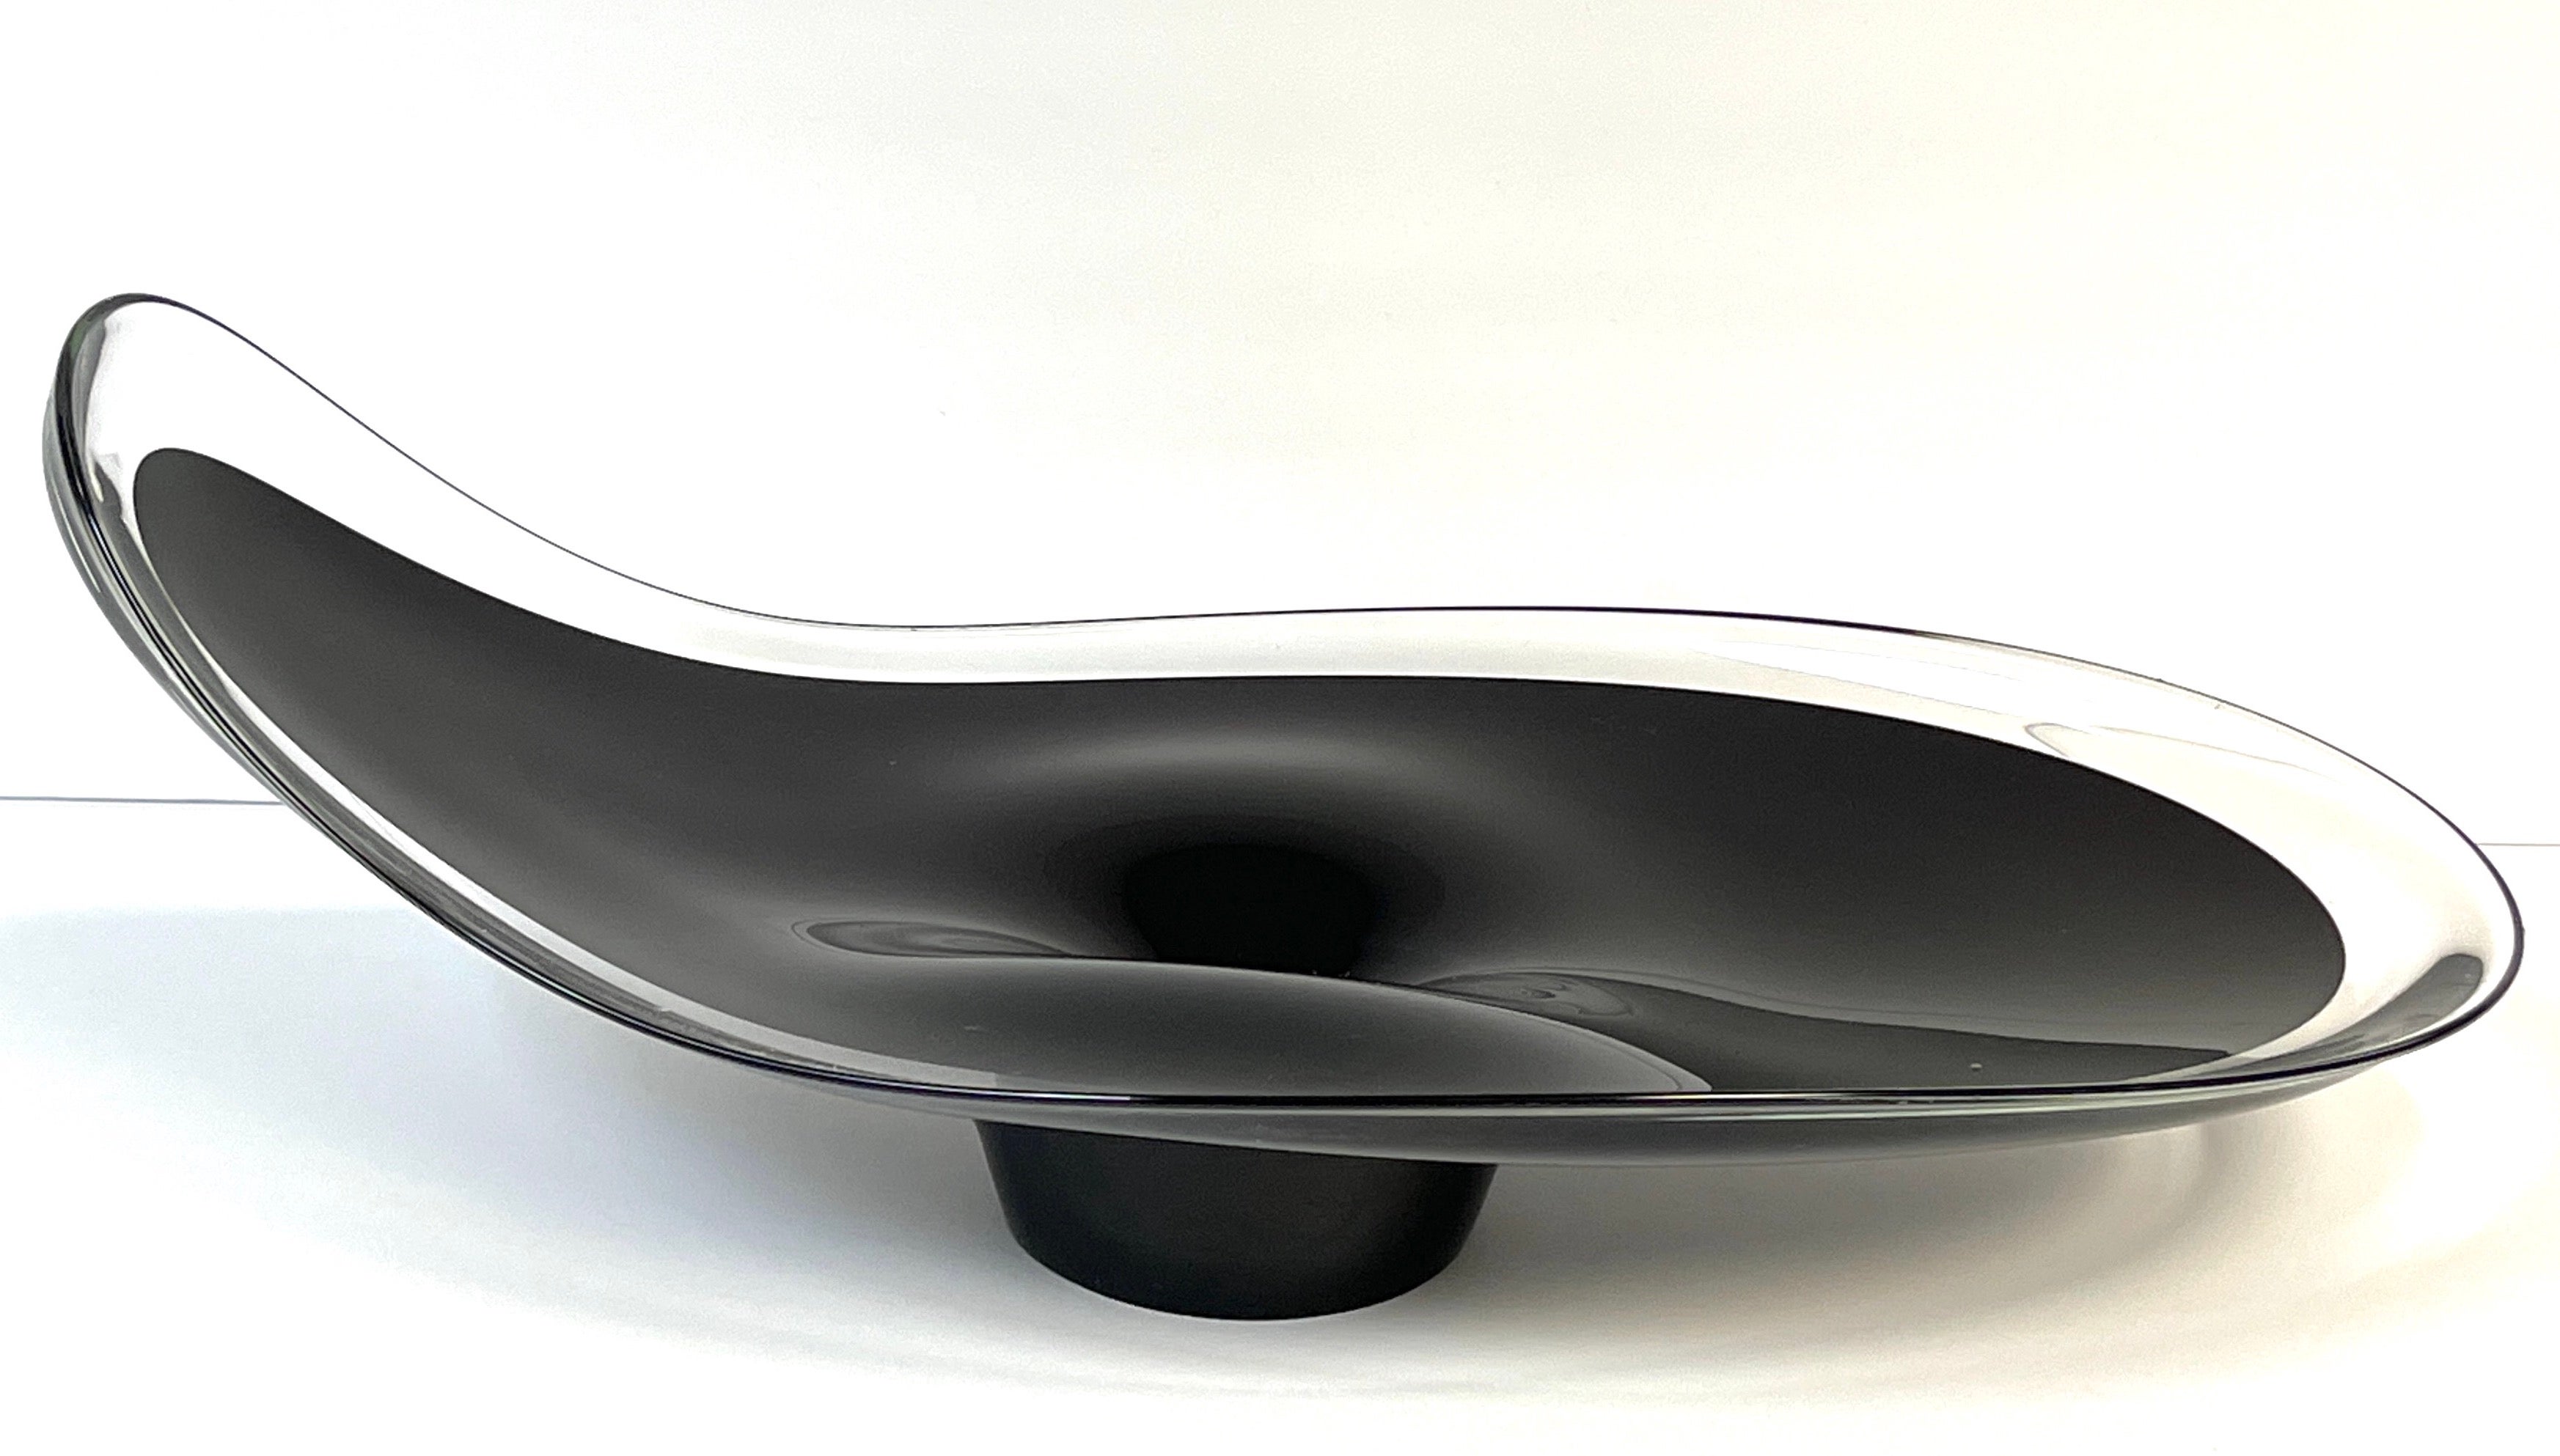 Large Italian Murano Sommerso Flavio Poli Glass Black & Clear Free Form Bowl
Italy, Circa 1960
Design Attributed to Flavio Poli
Made by Murano Sommerso Glass Works

A stunning example of mid-century Murano glass, this large free form bowl showcases